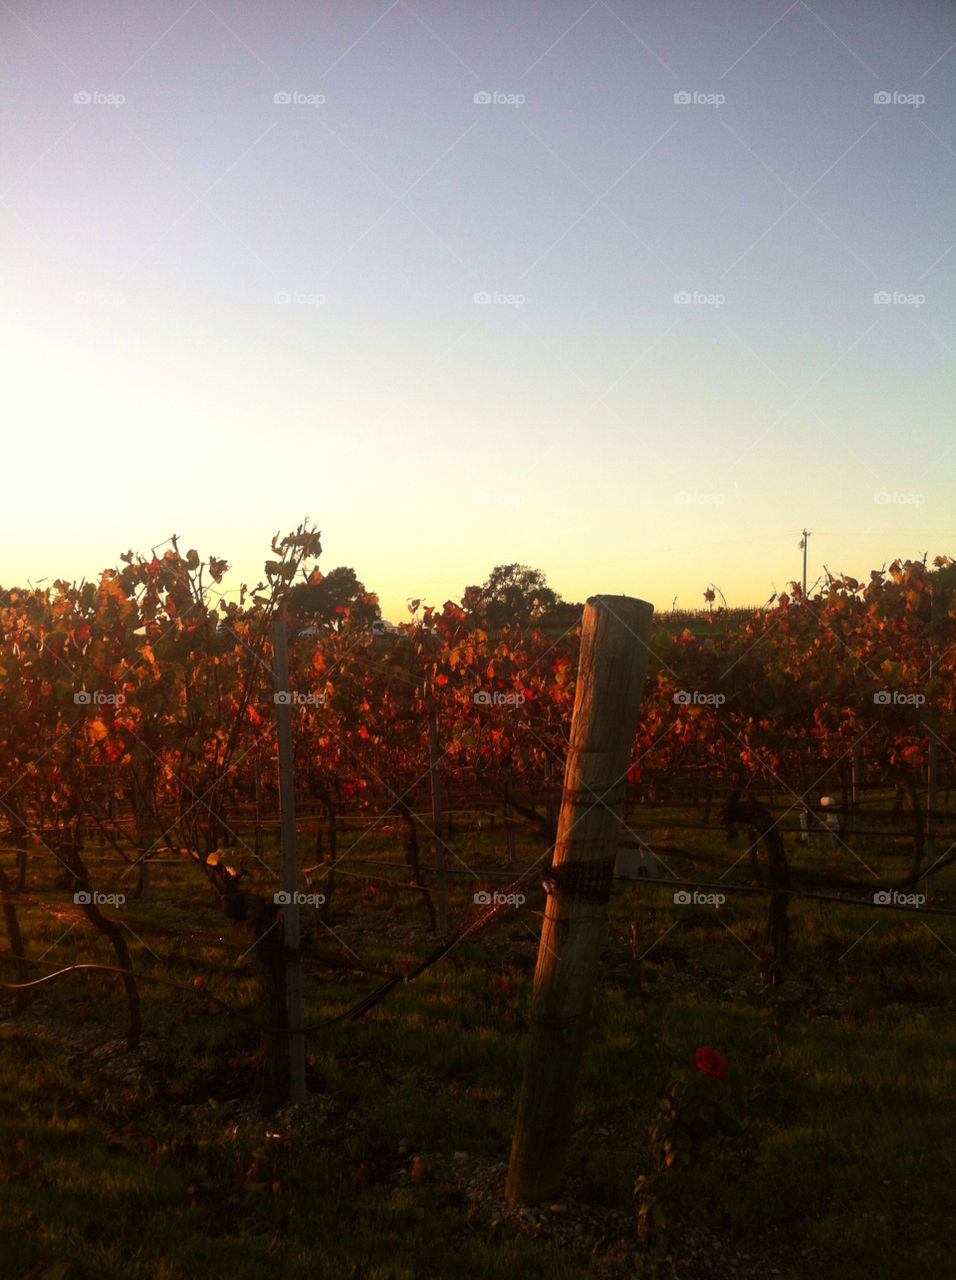 Grapevines at sunset.